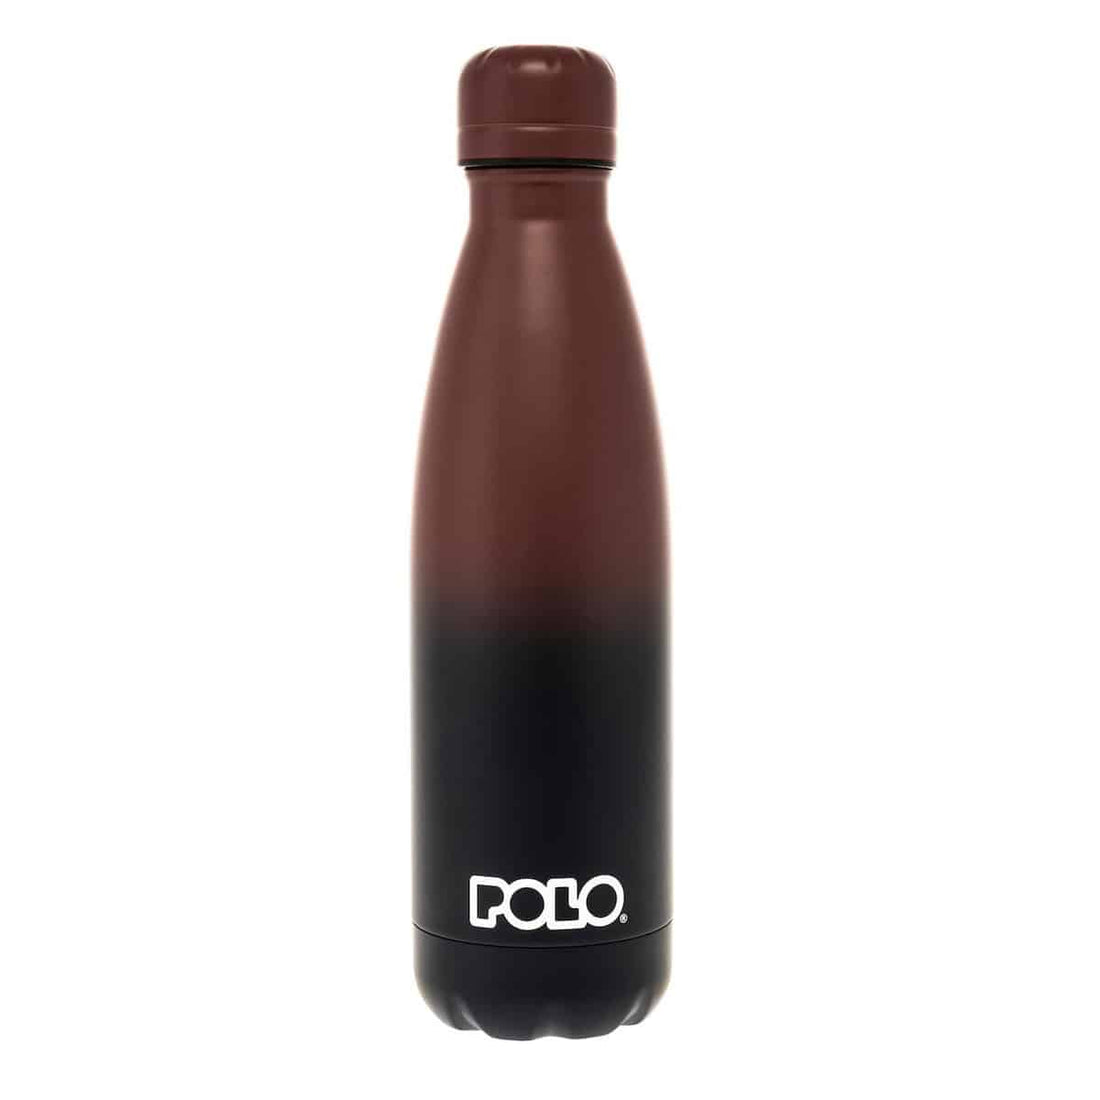 Polo Thermos Stainless Steel 0.50L Μπορντω- Μπλε